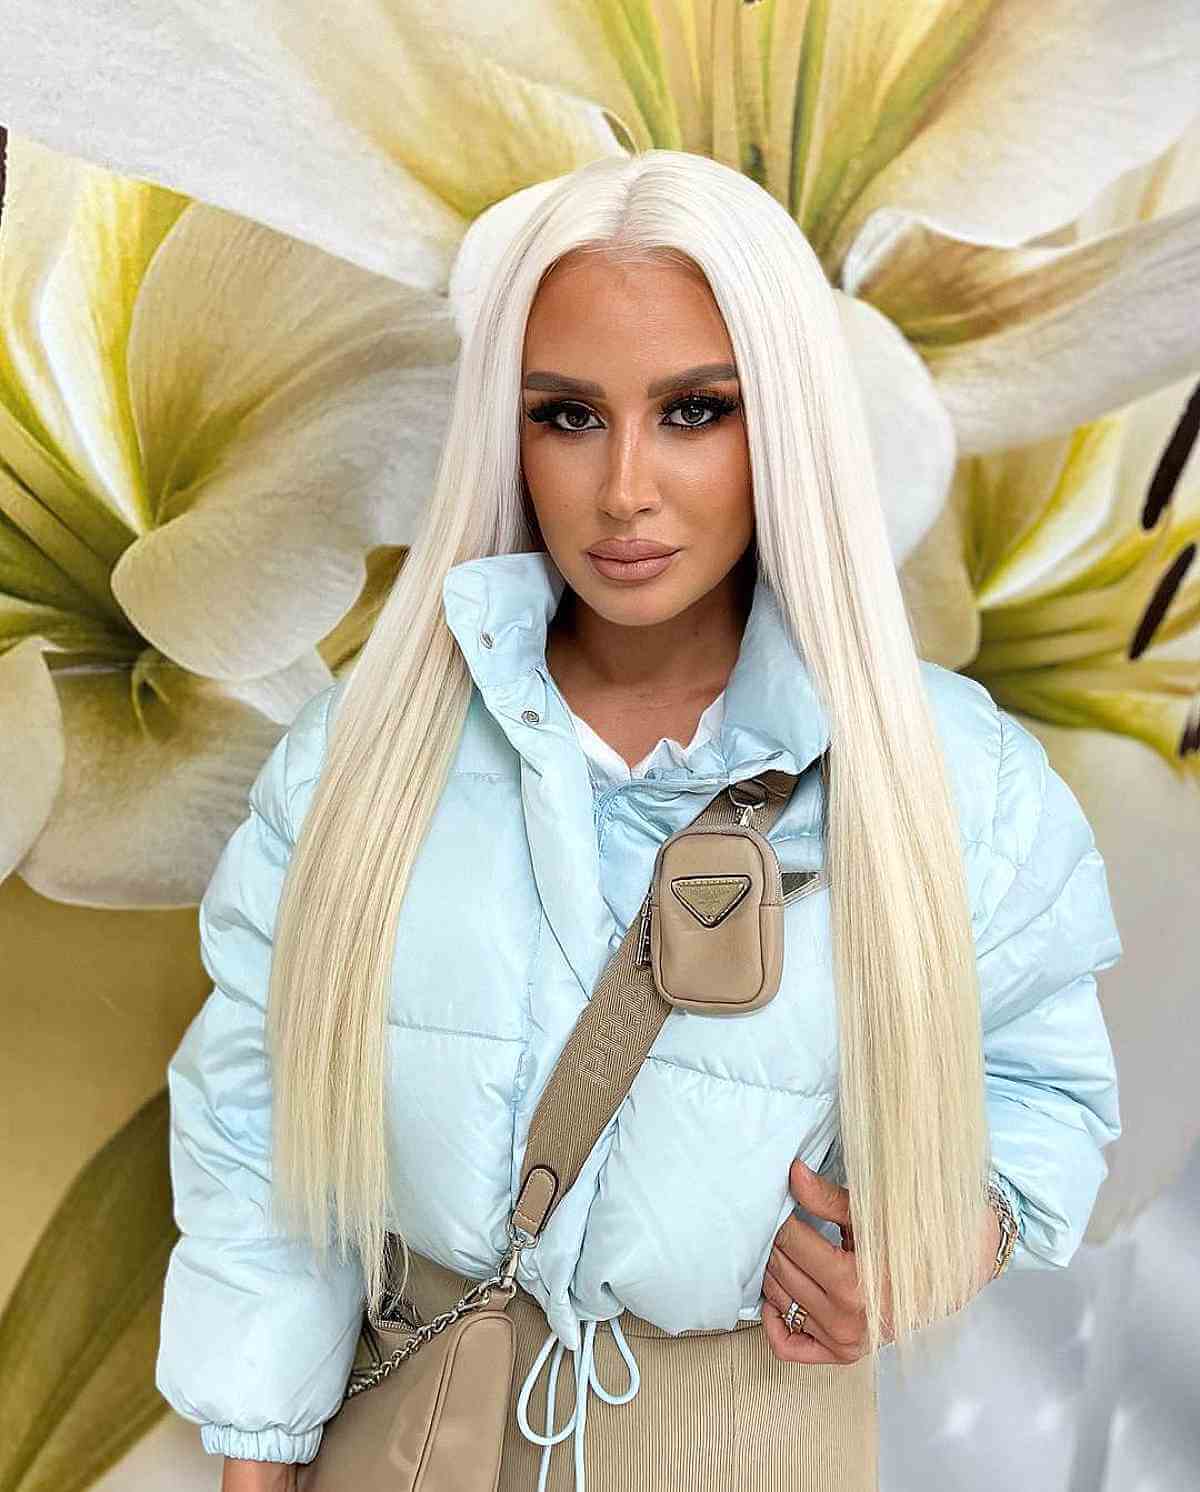 Waist-Length Icy White Blonde Roots and Hair